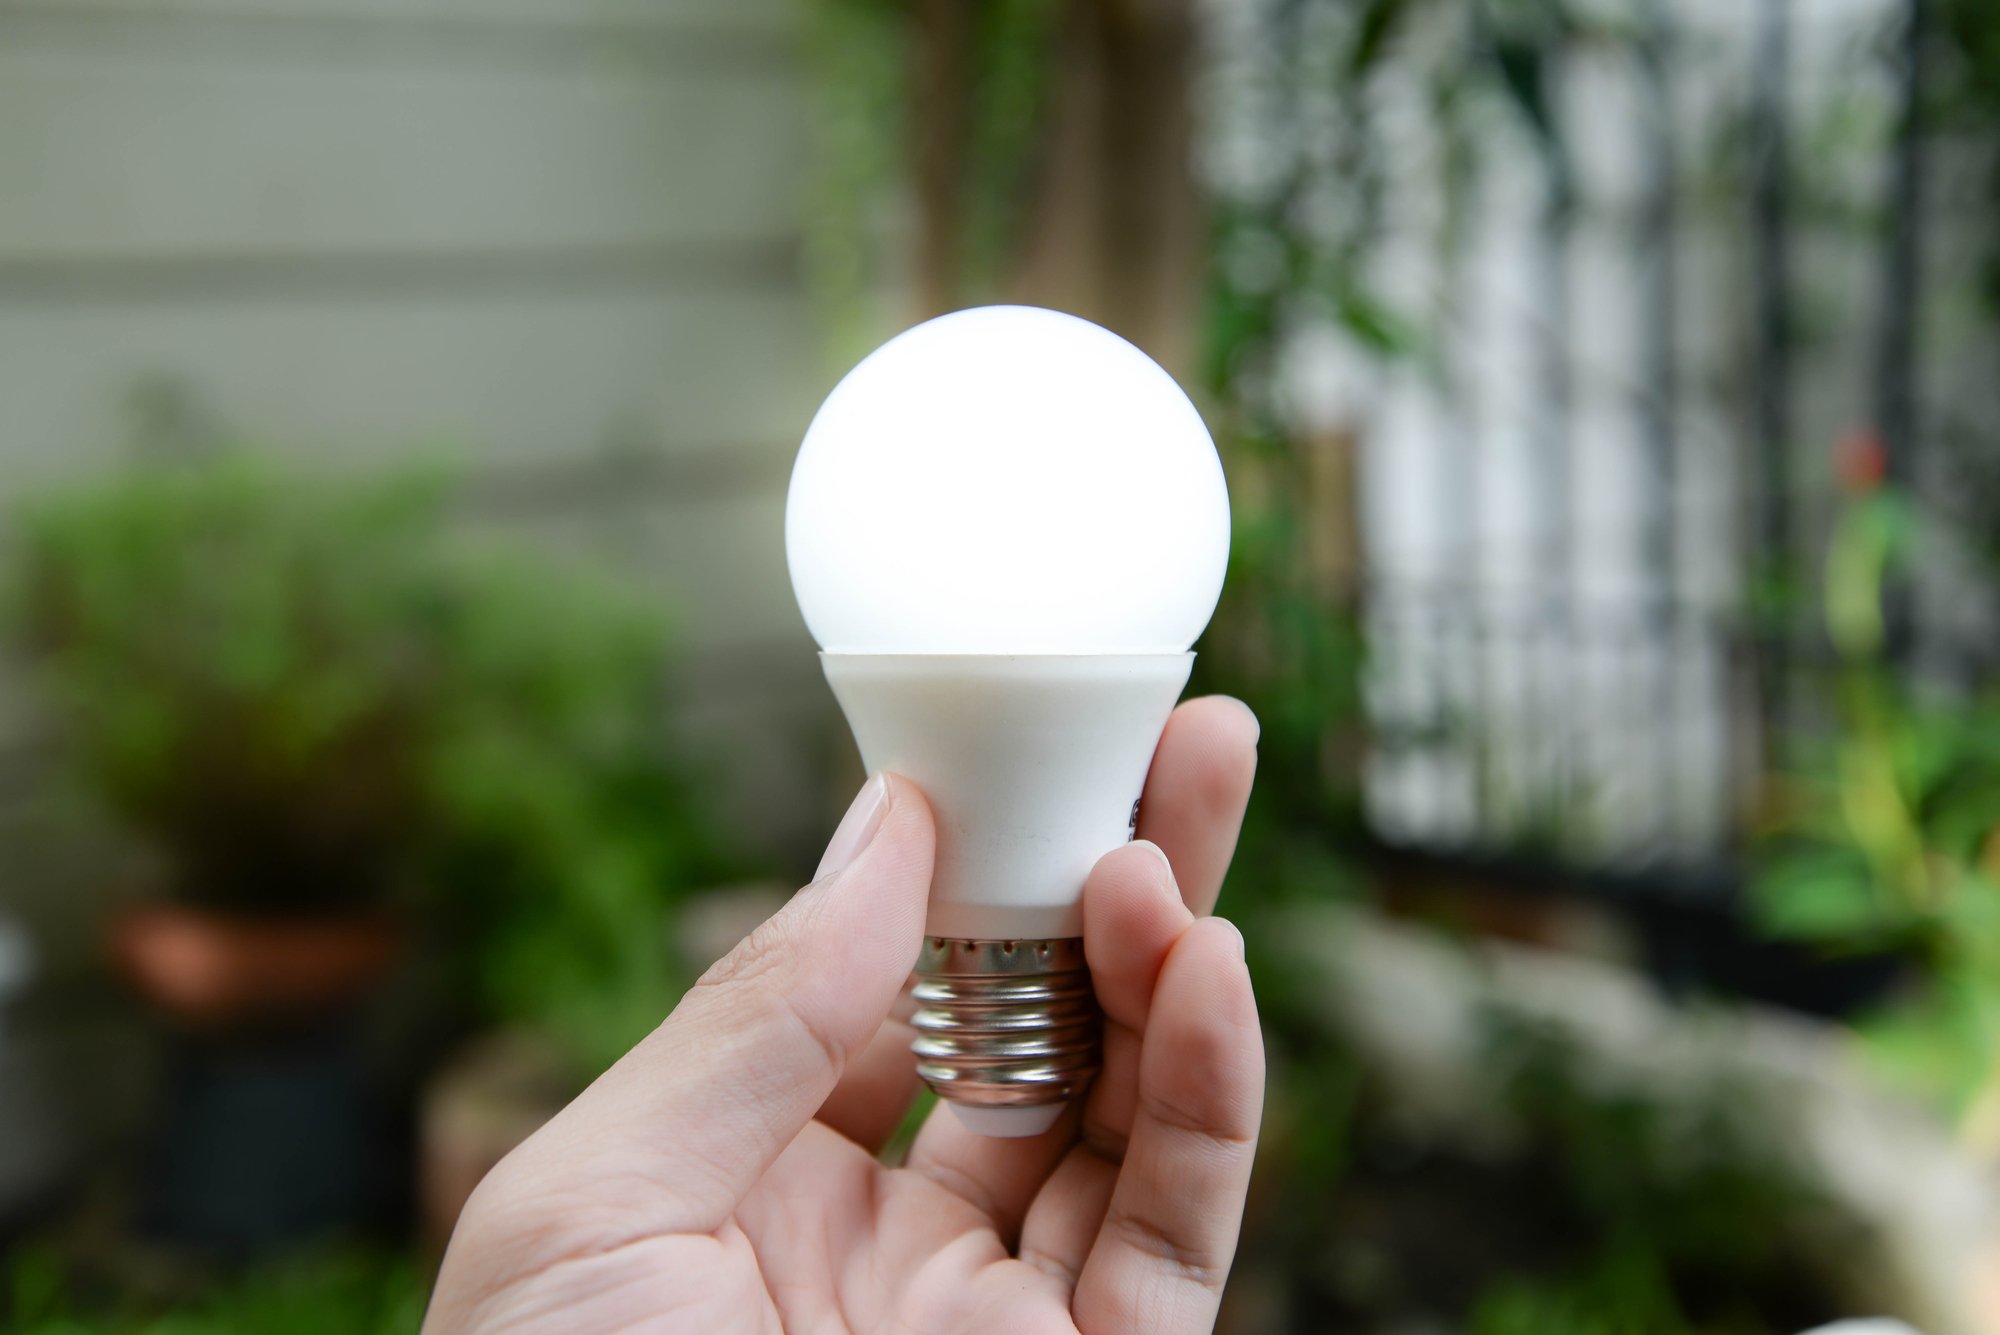 LED bulb with lighting - New technology of energy